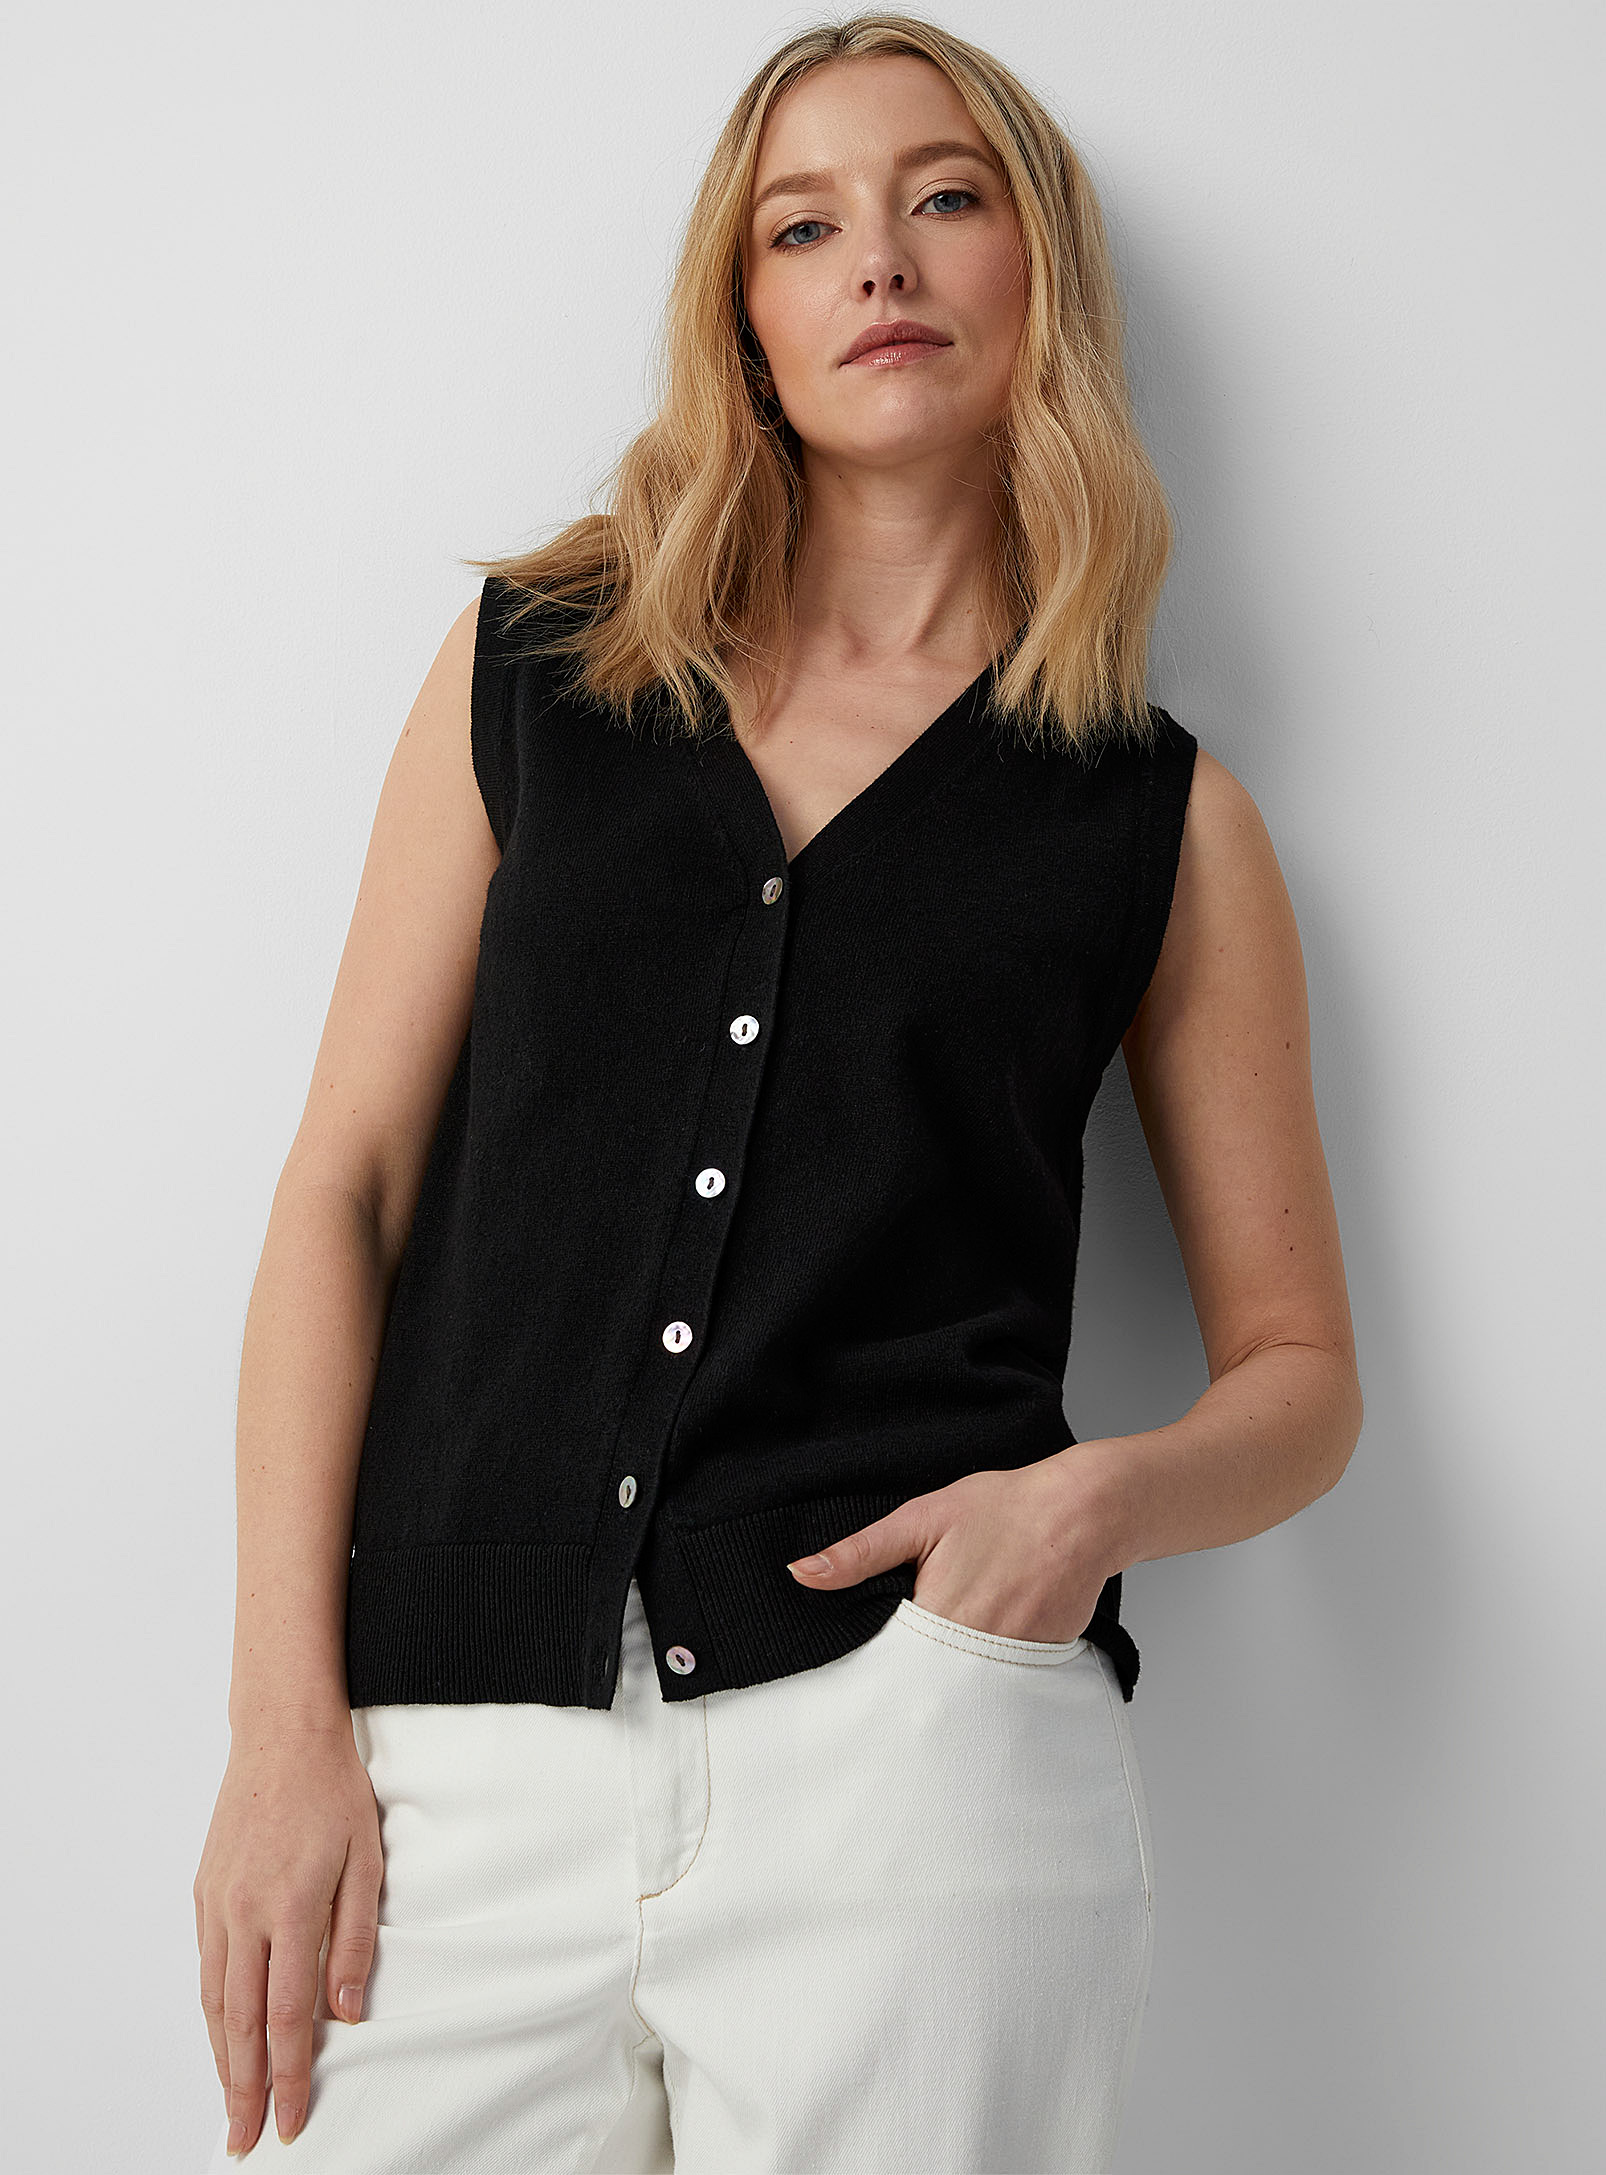 Contemporaine - Women's Mother-of-pearl buttons sweater vest